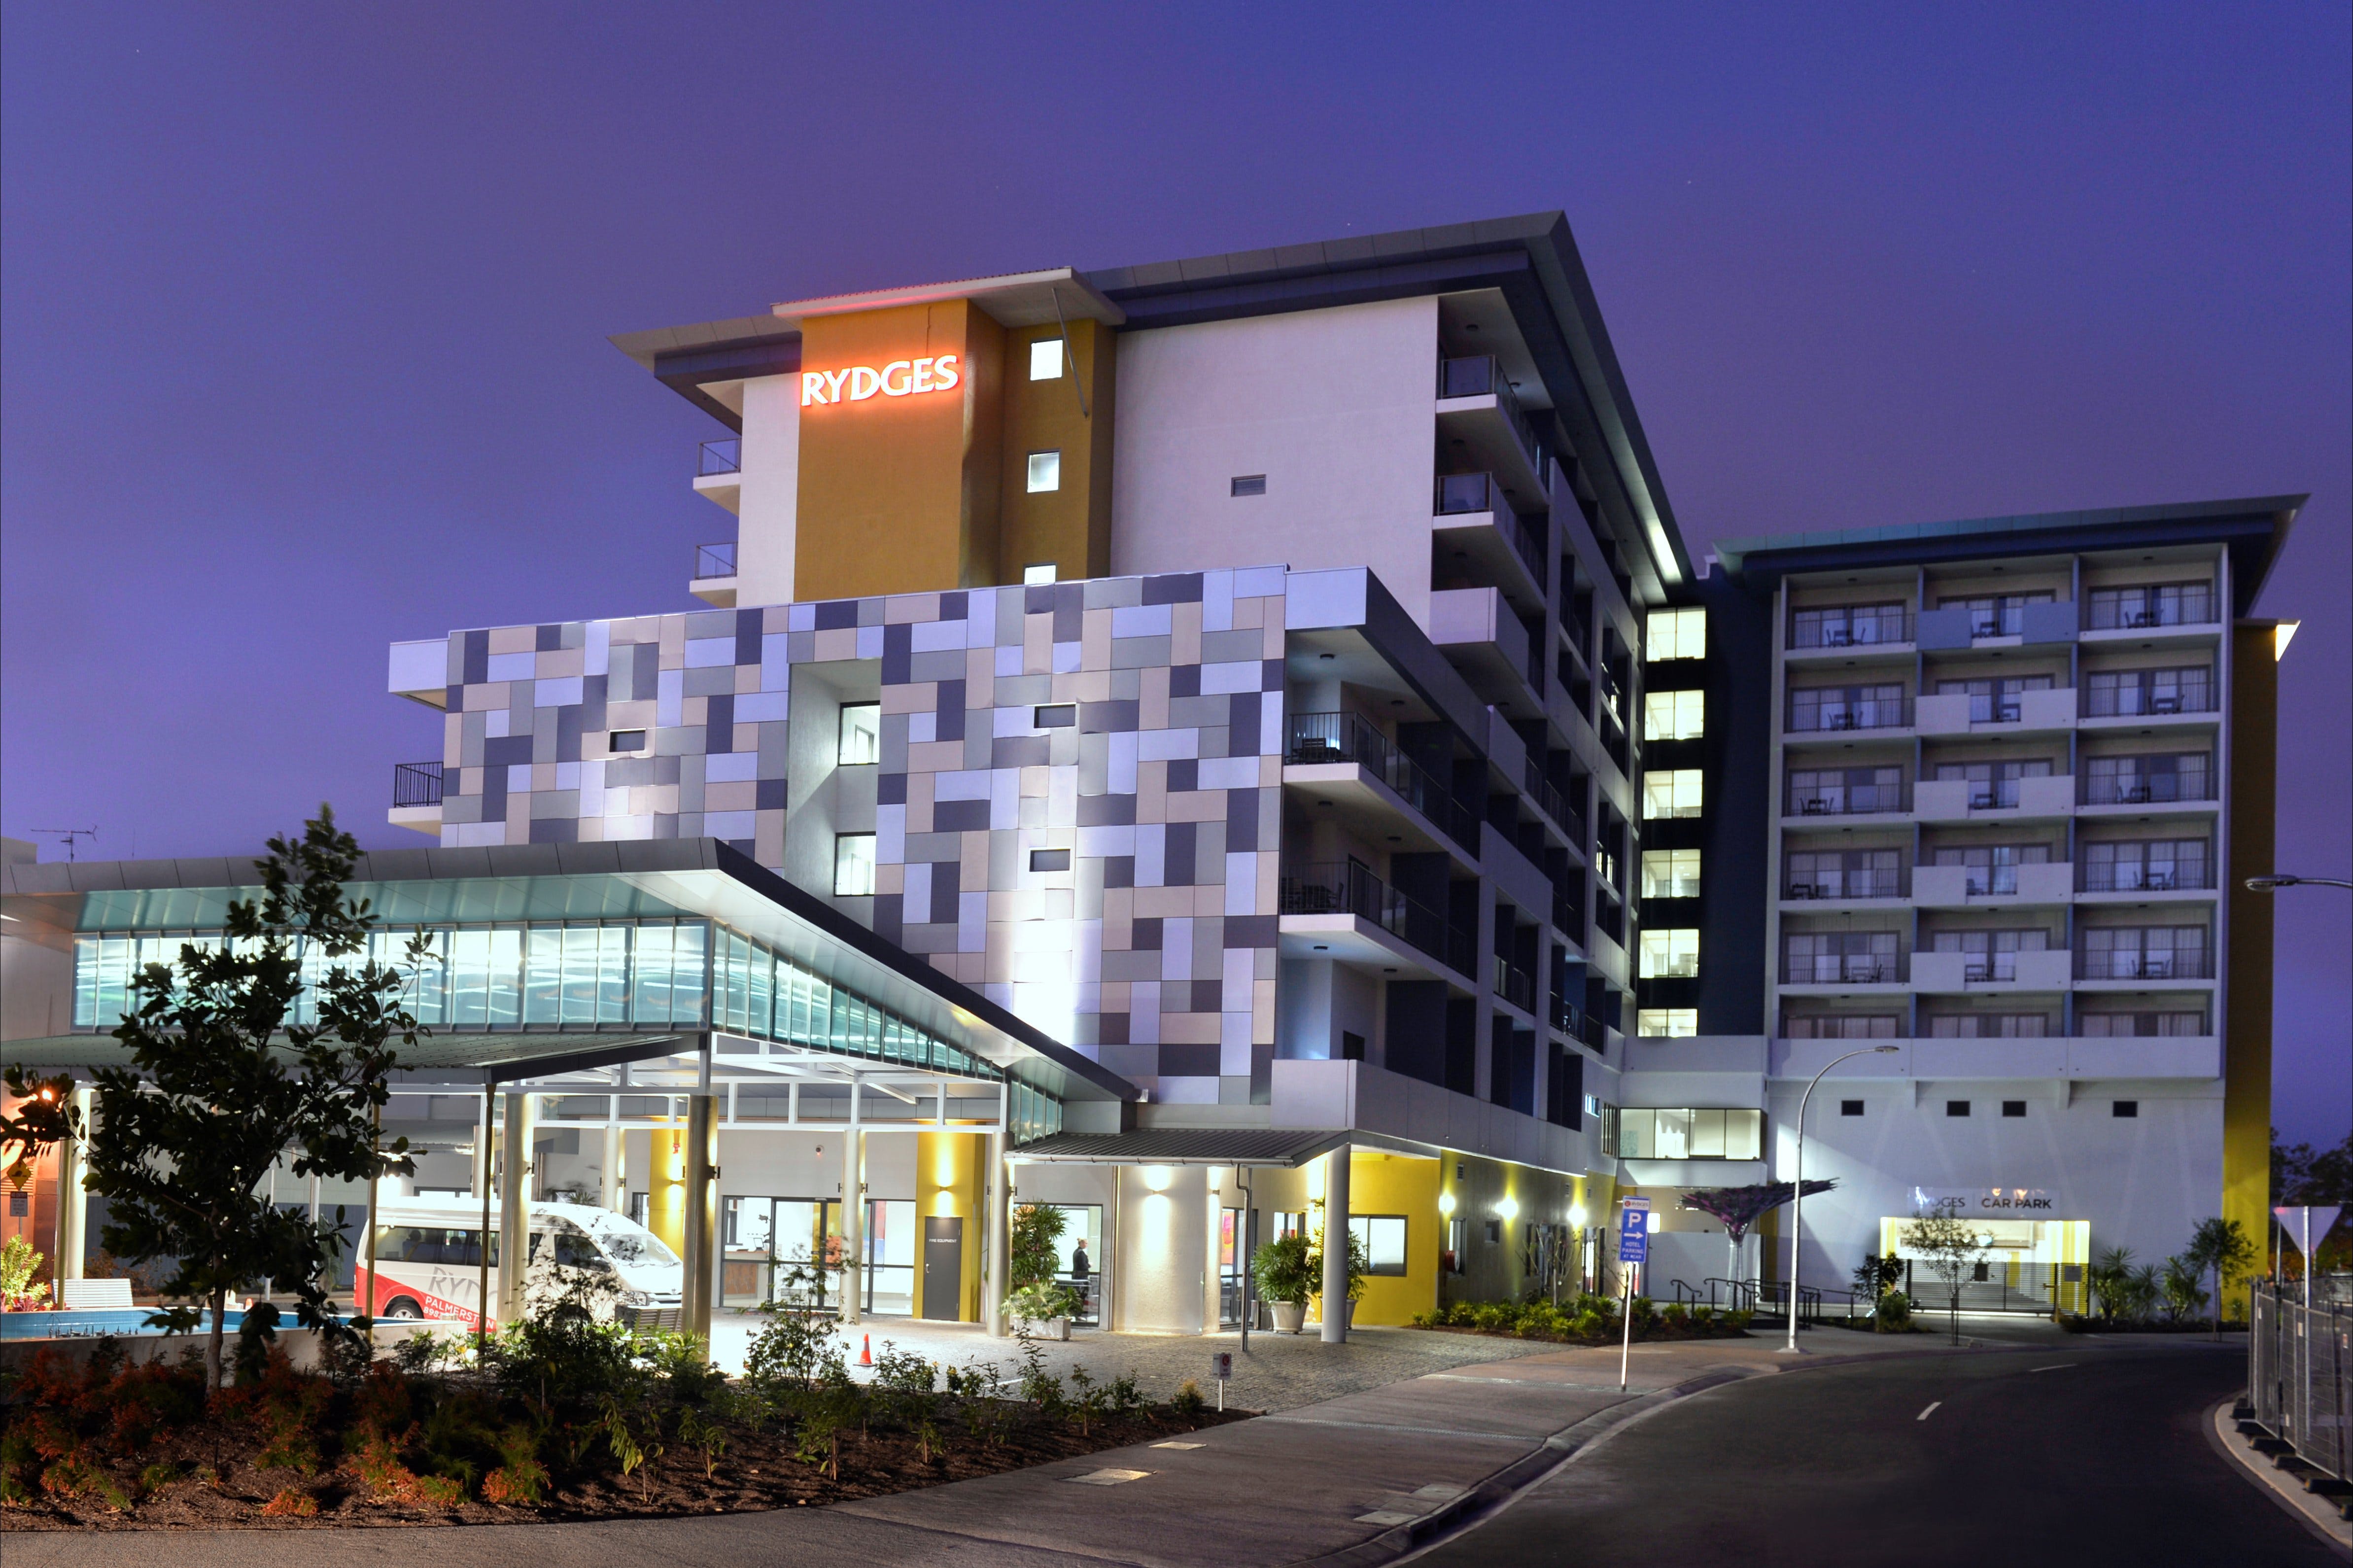 Rydges Palmerston - Accommodation Bookings 0